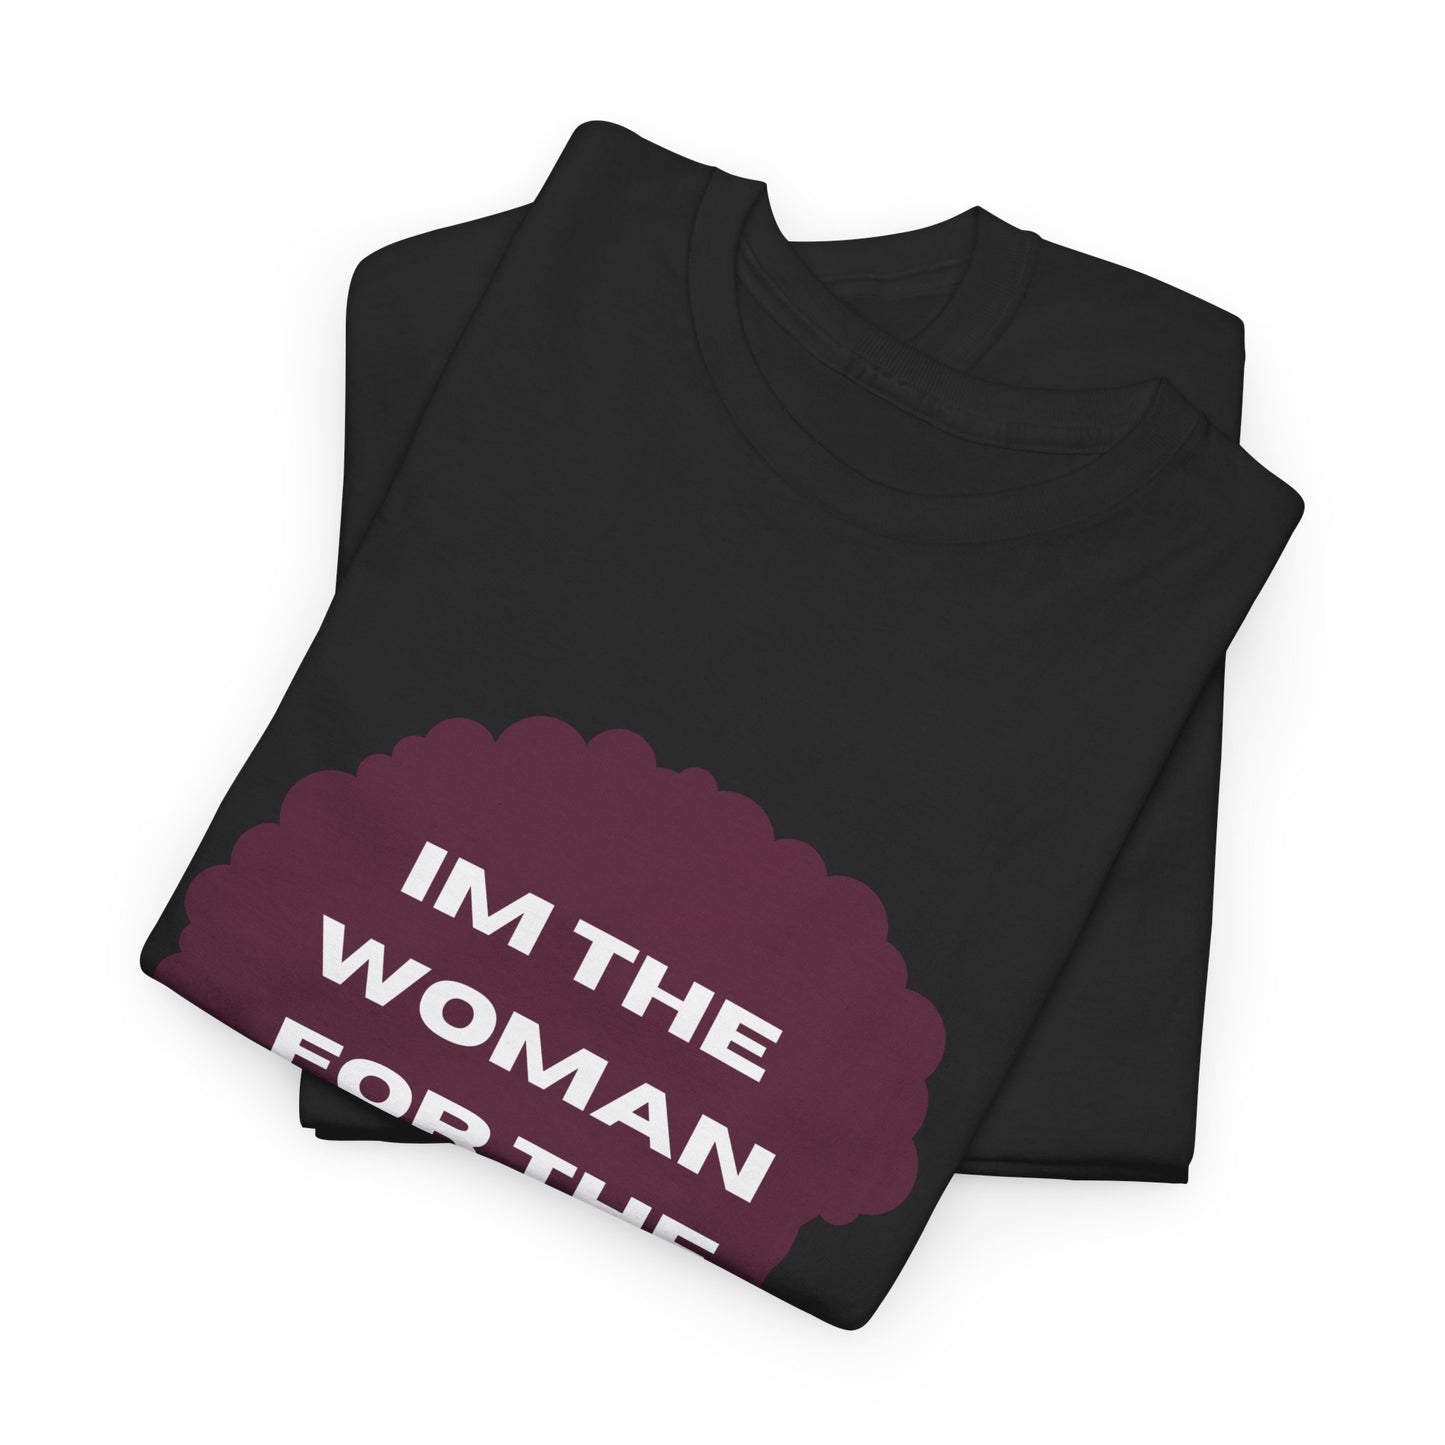 Unisex Heavy Cotton (I'm The Woman For The Job) T-shirt